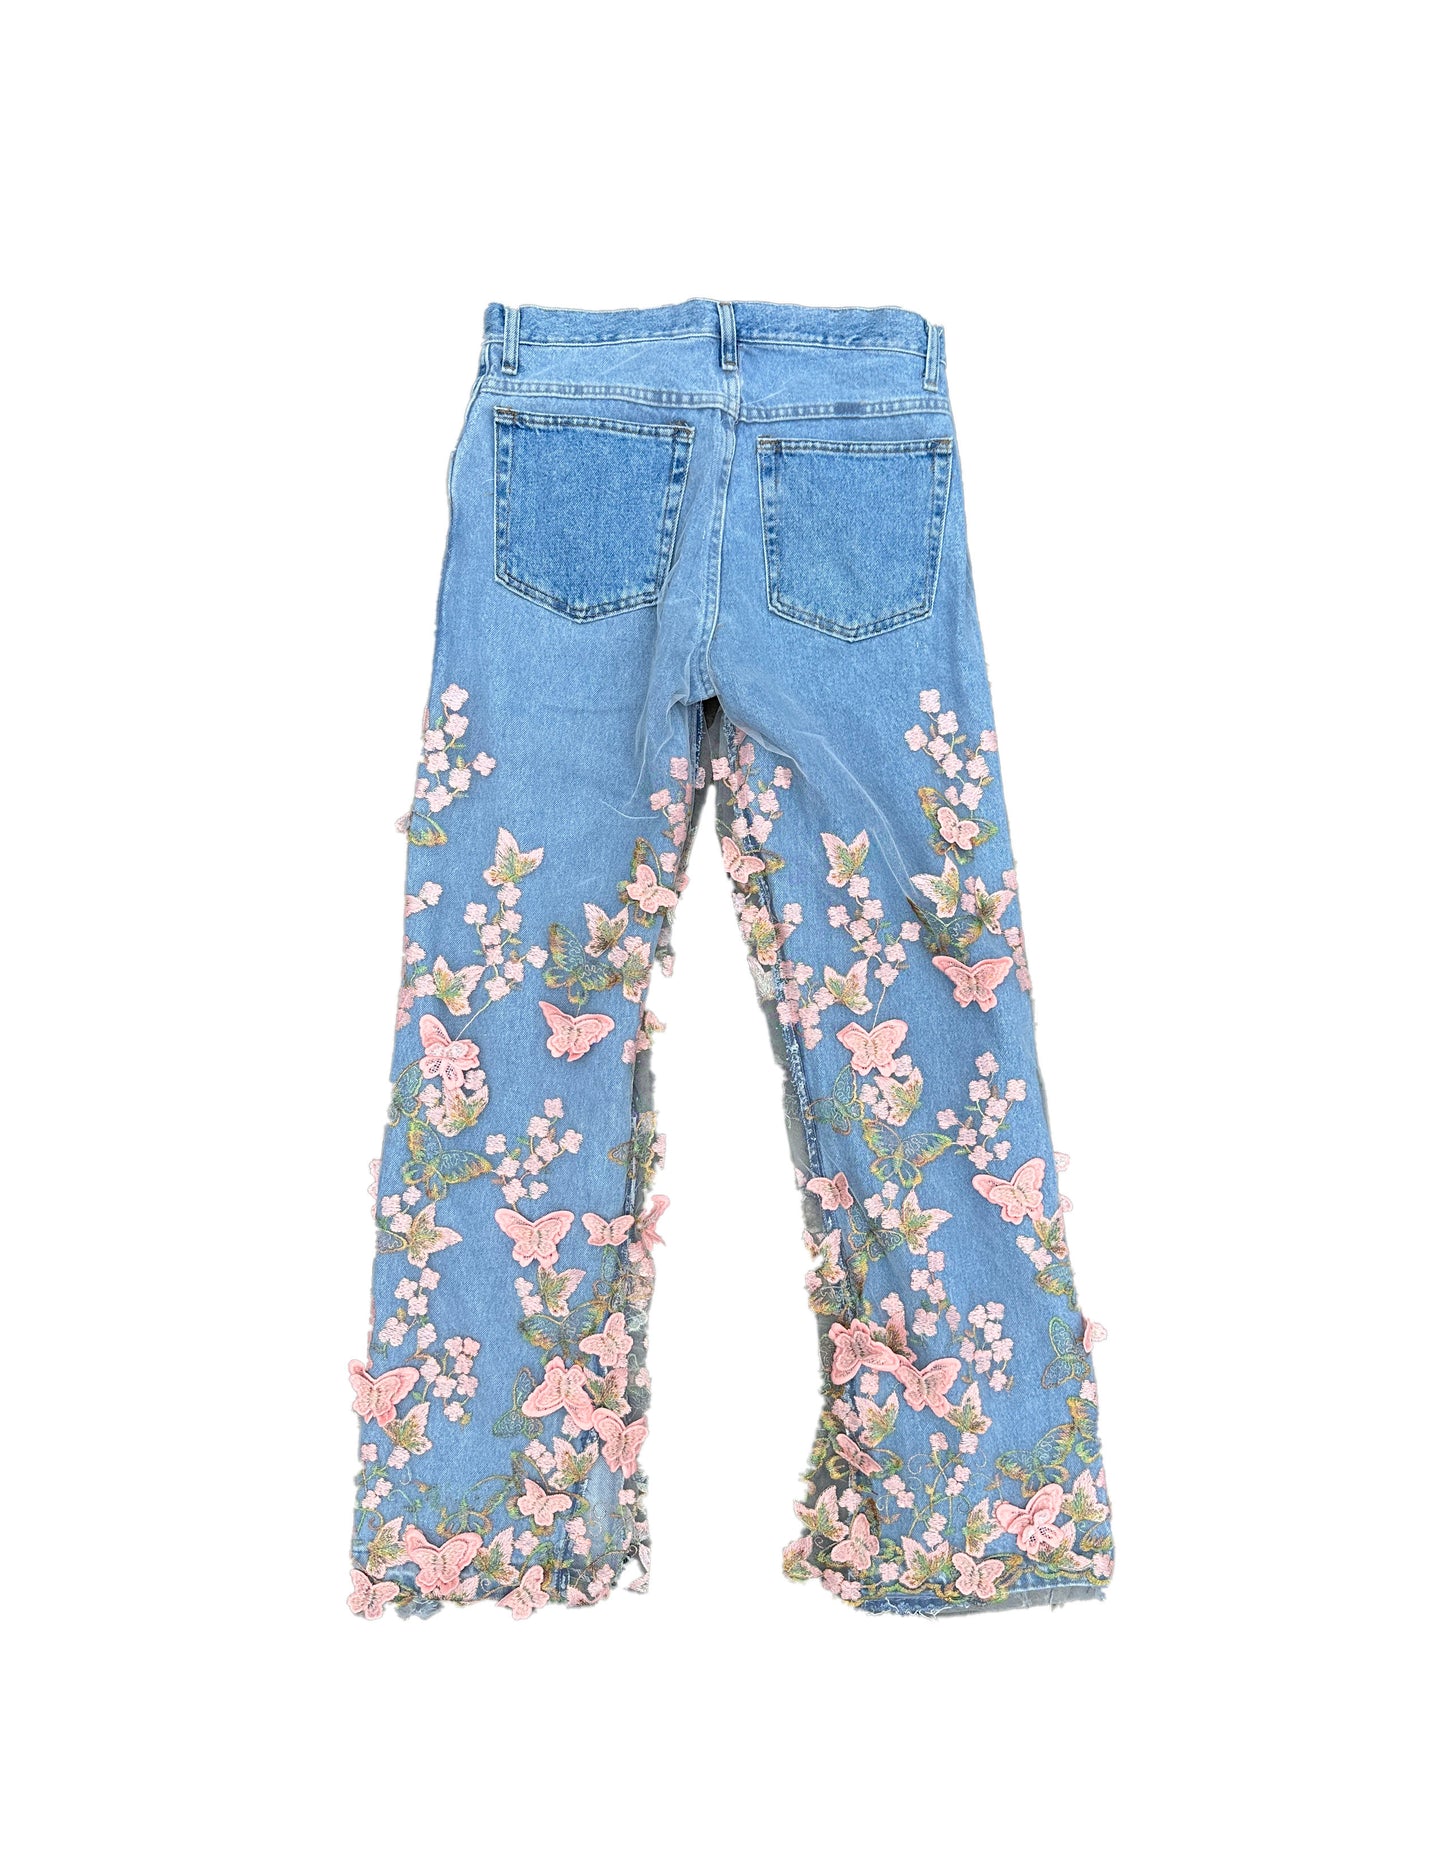 Buttery embroidery lace jeans